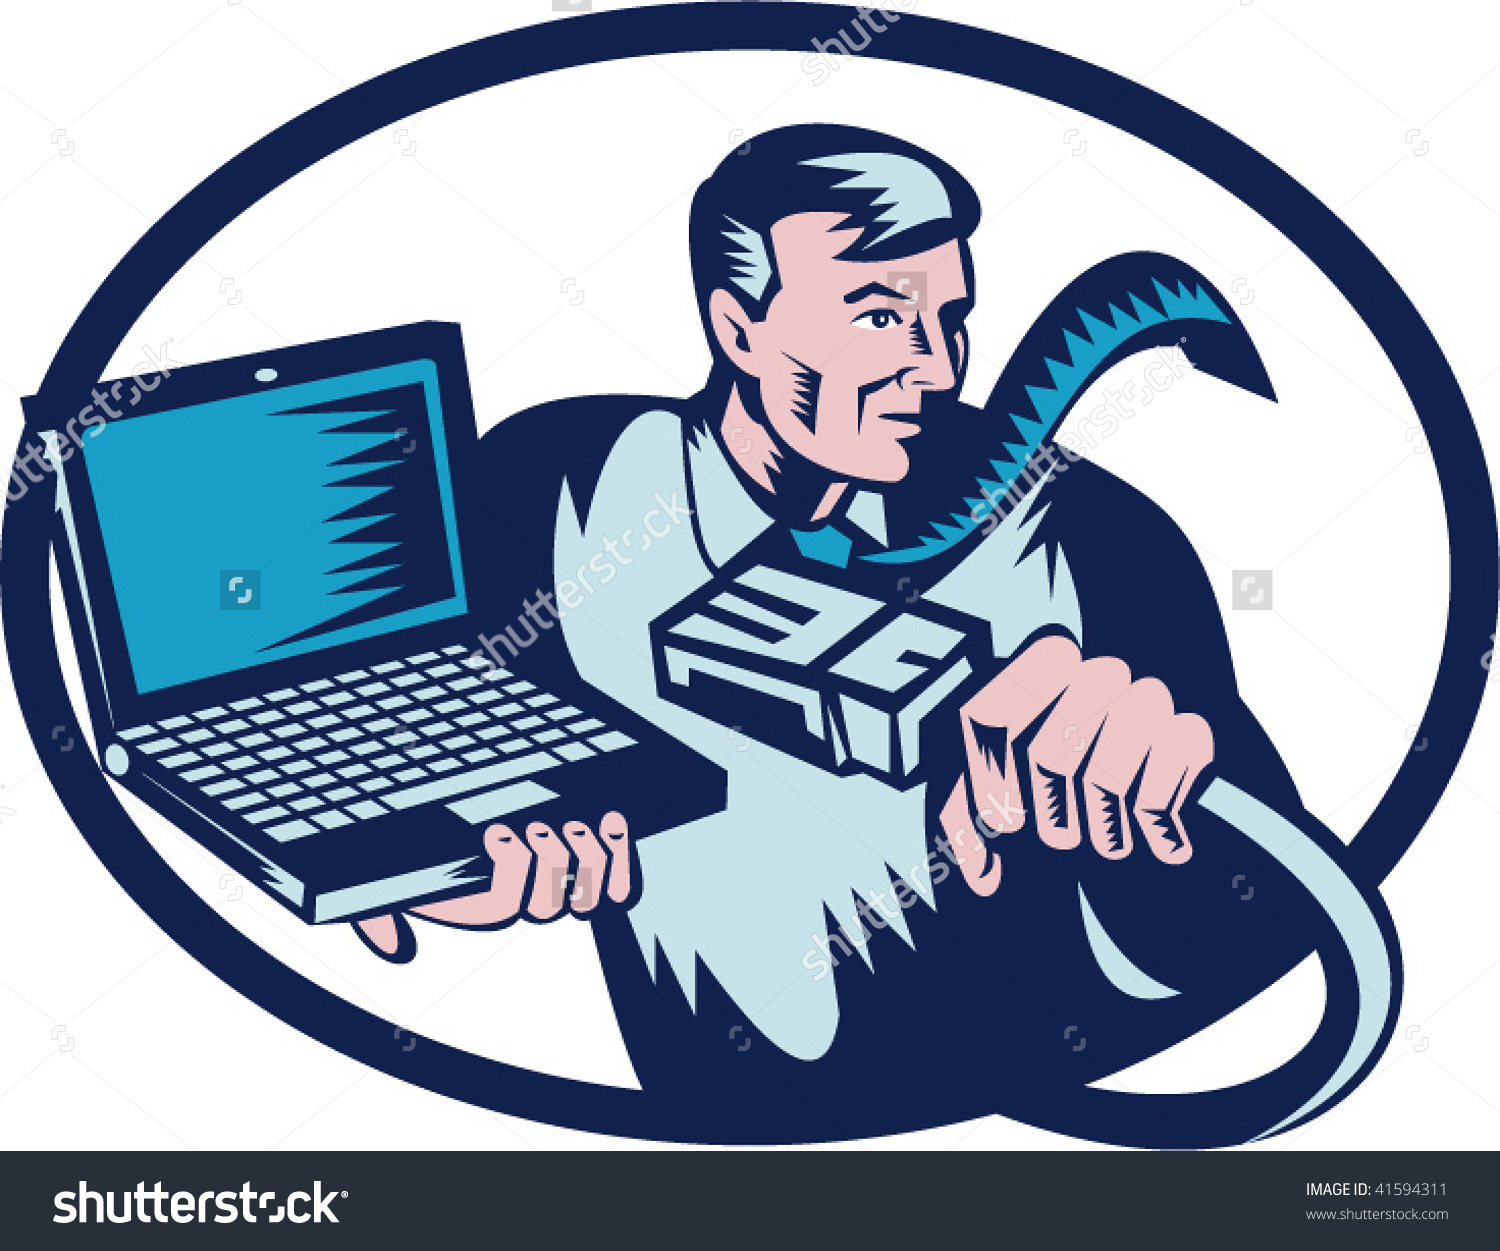 Done Retro Woodcut Style Image Shows Stock Vector 41594311.